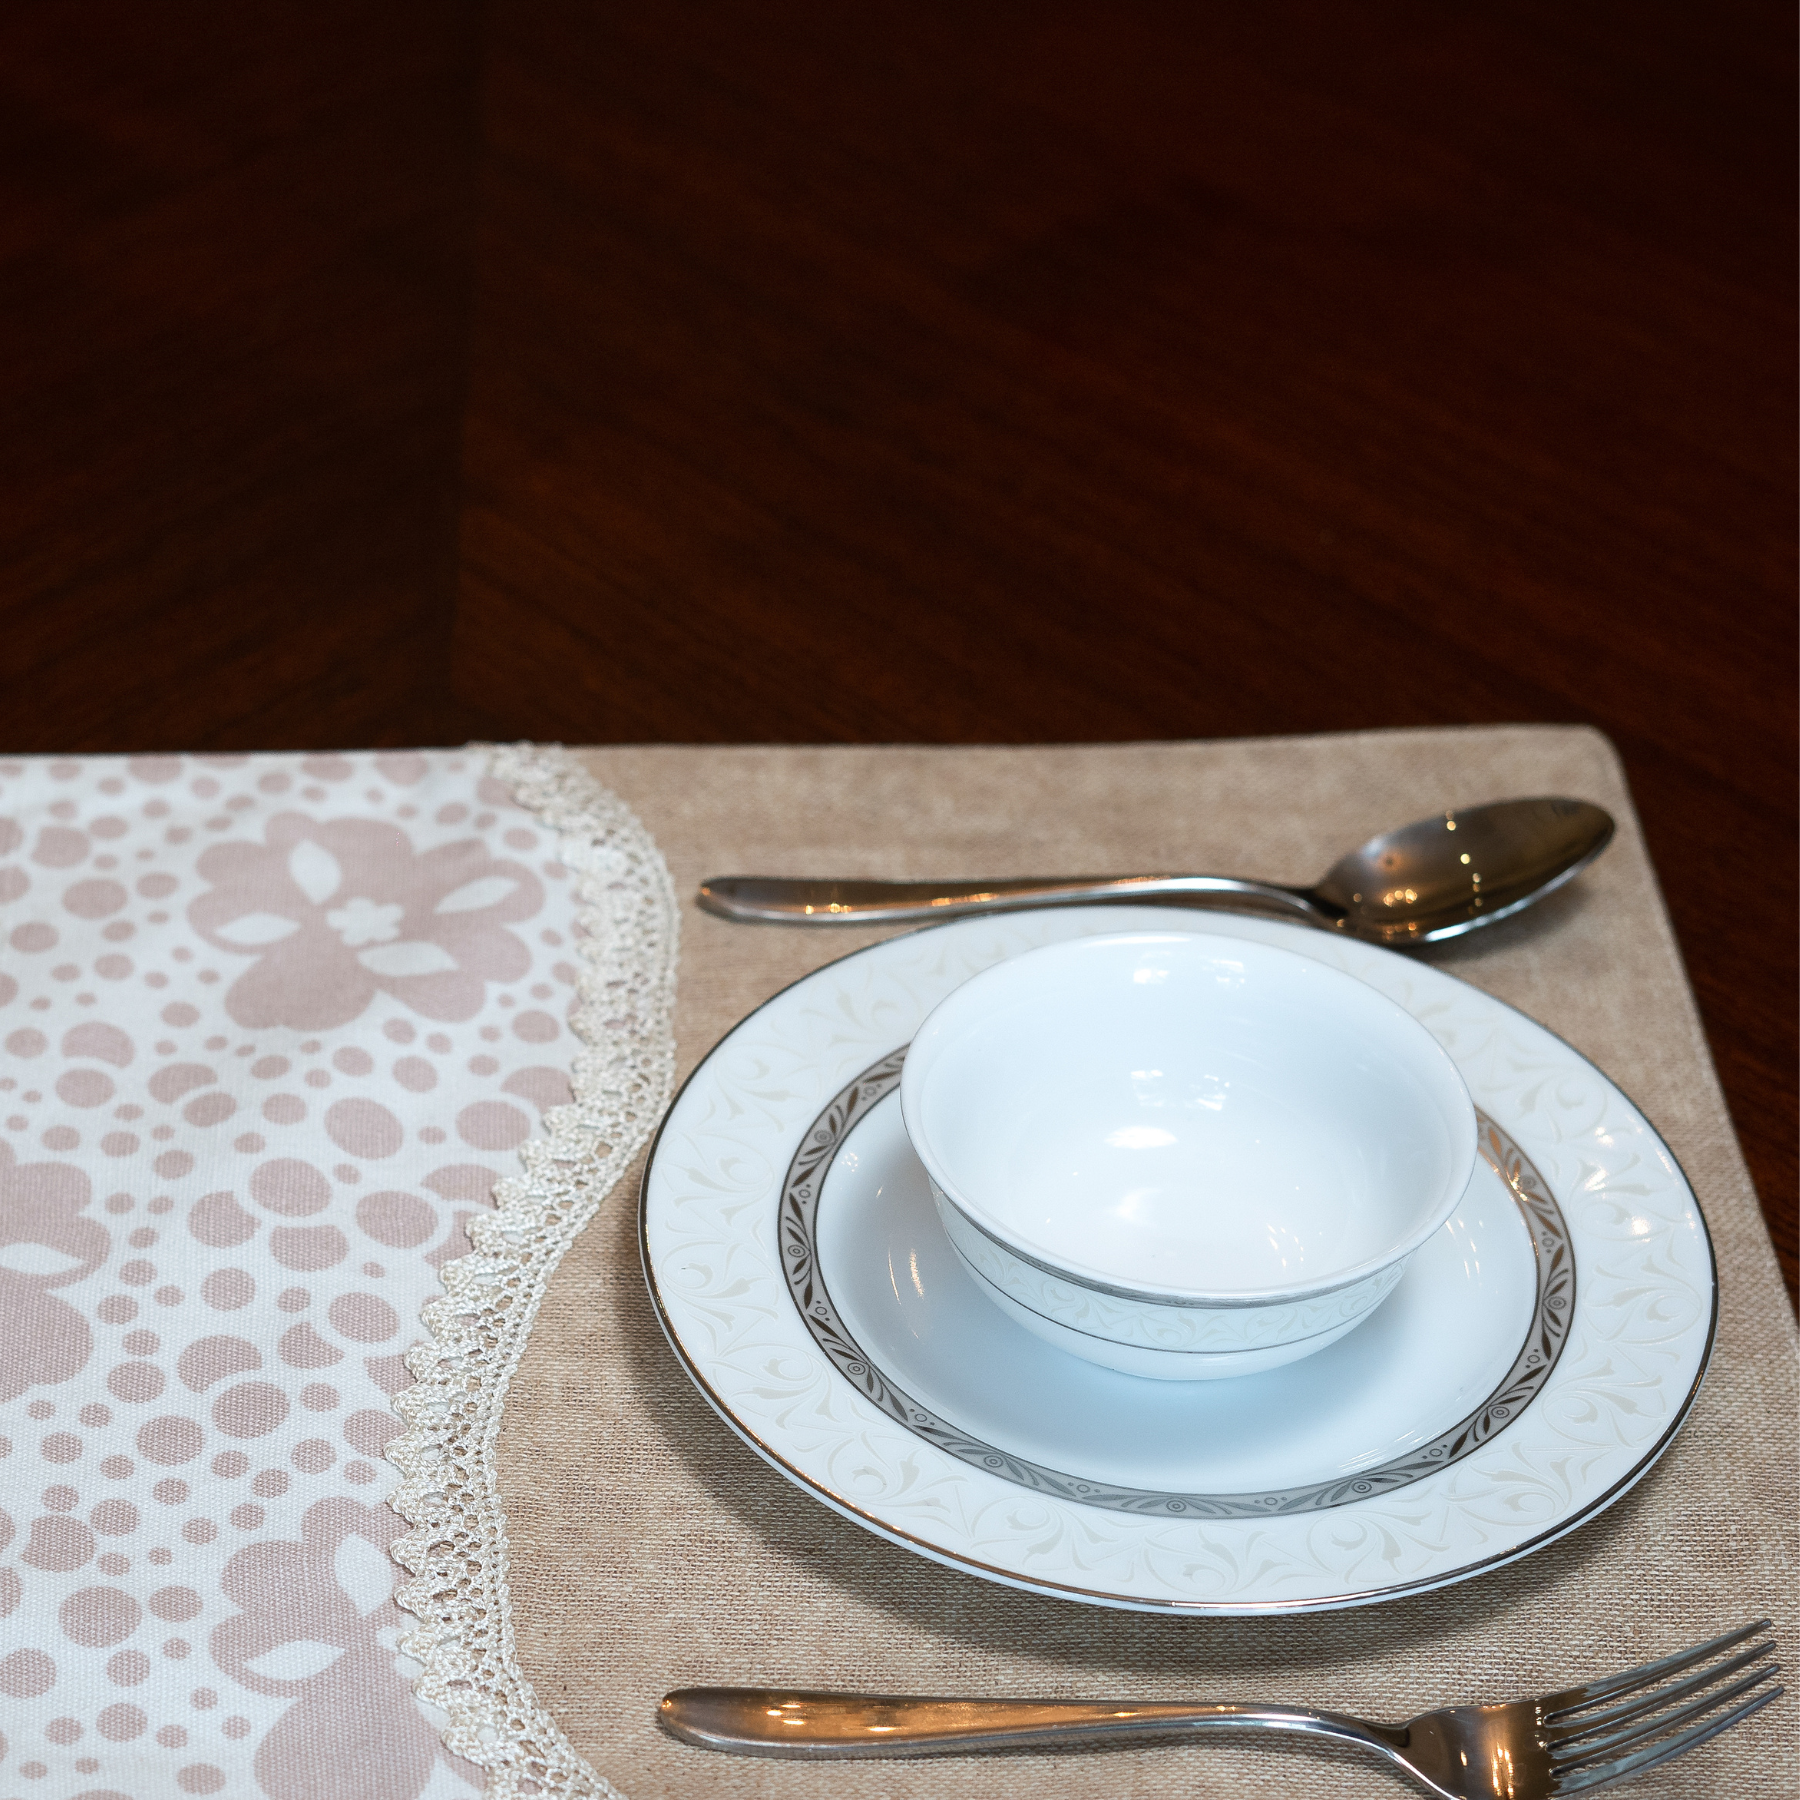 The Luxelife Cappuccino Placemats